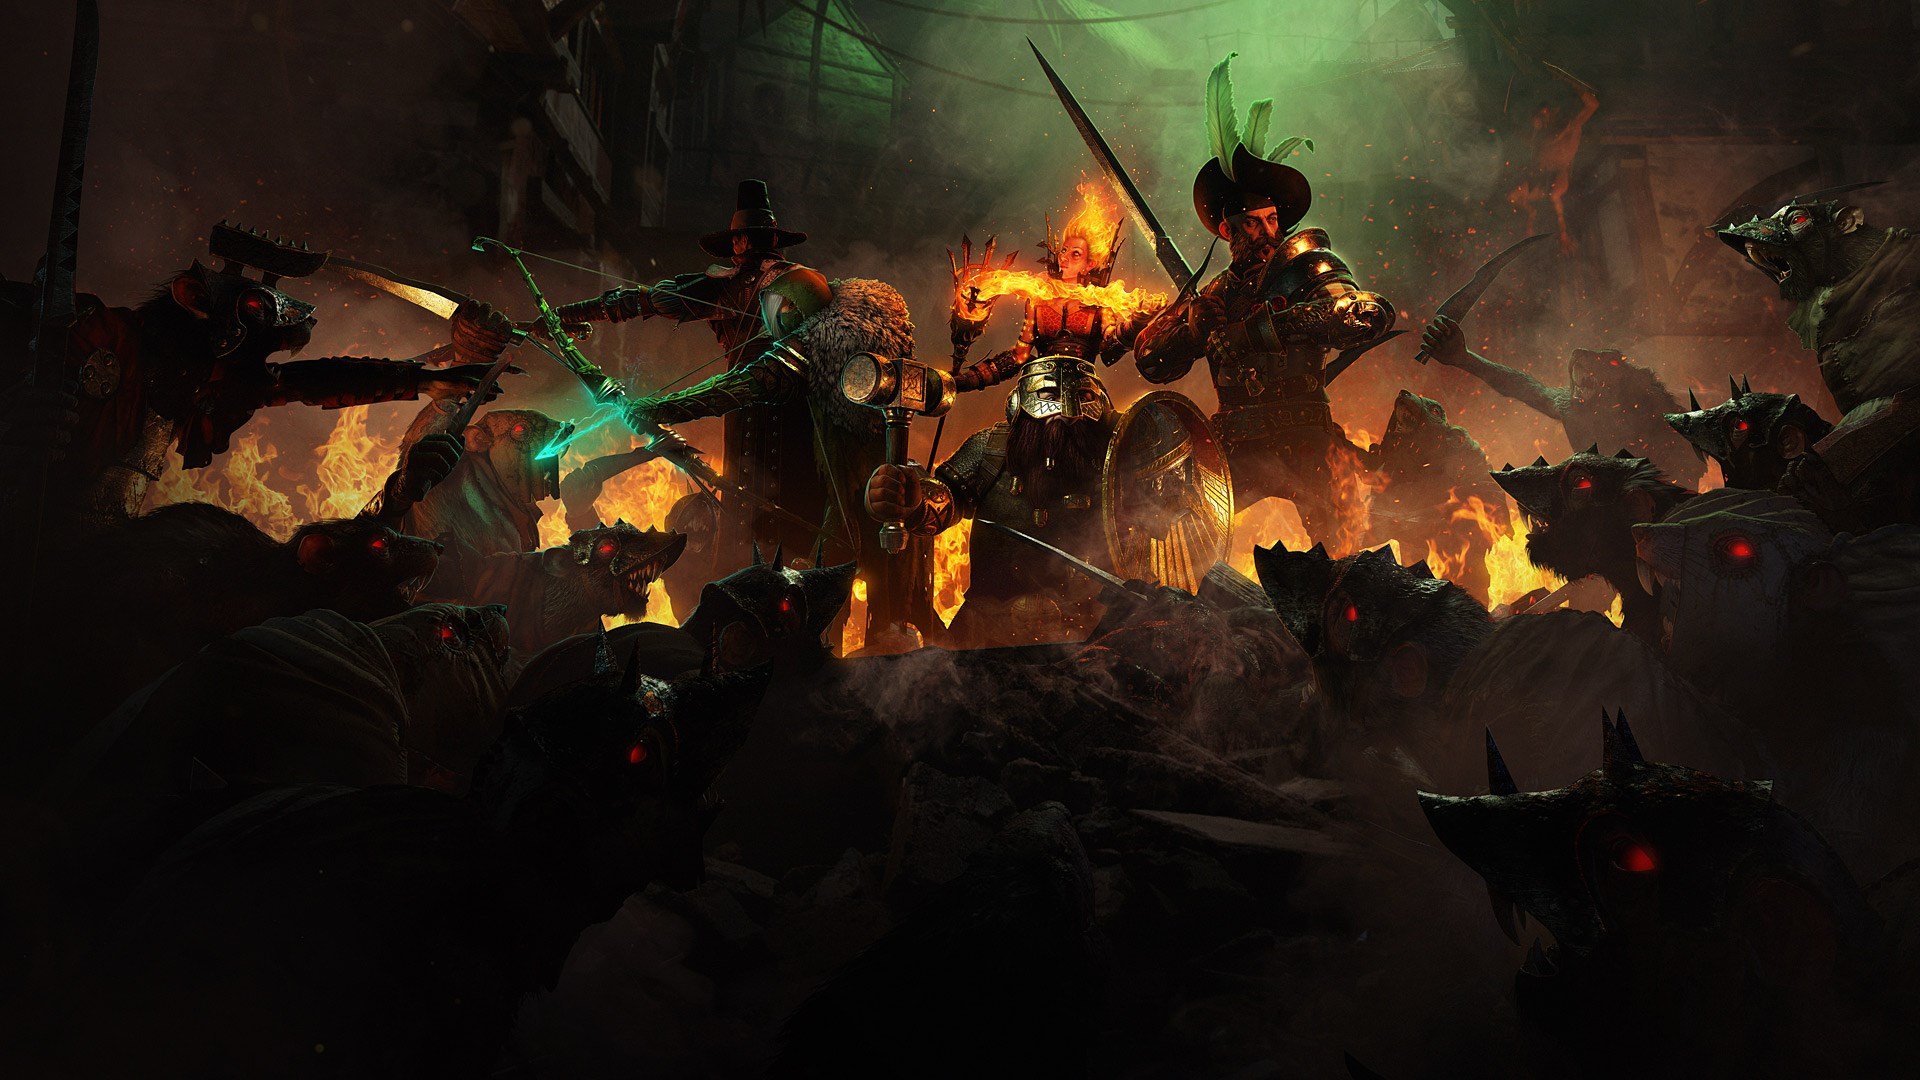 Warhammer: End Times - Vermintide cover image